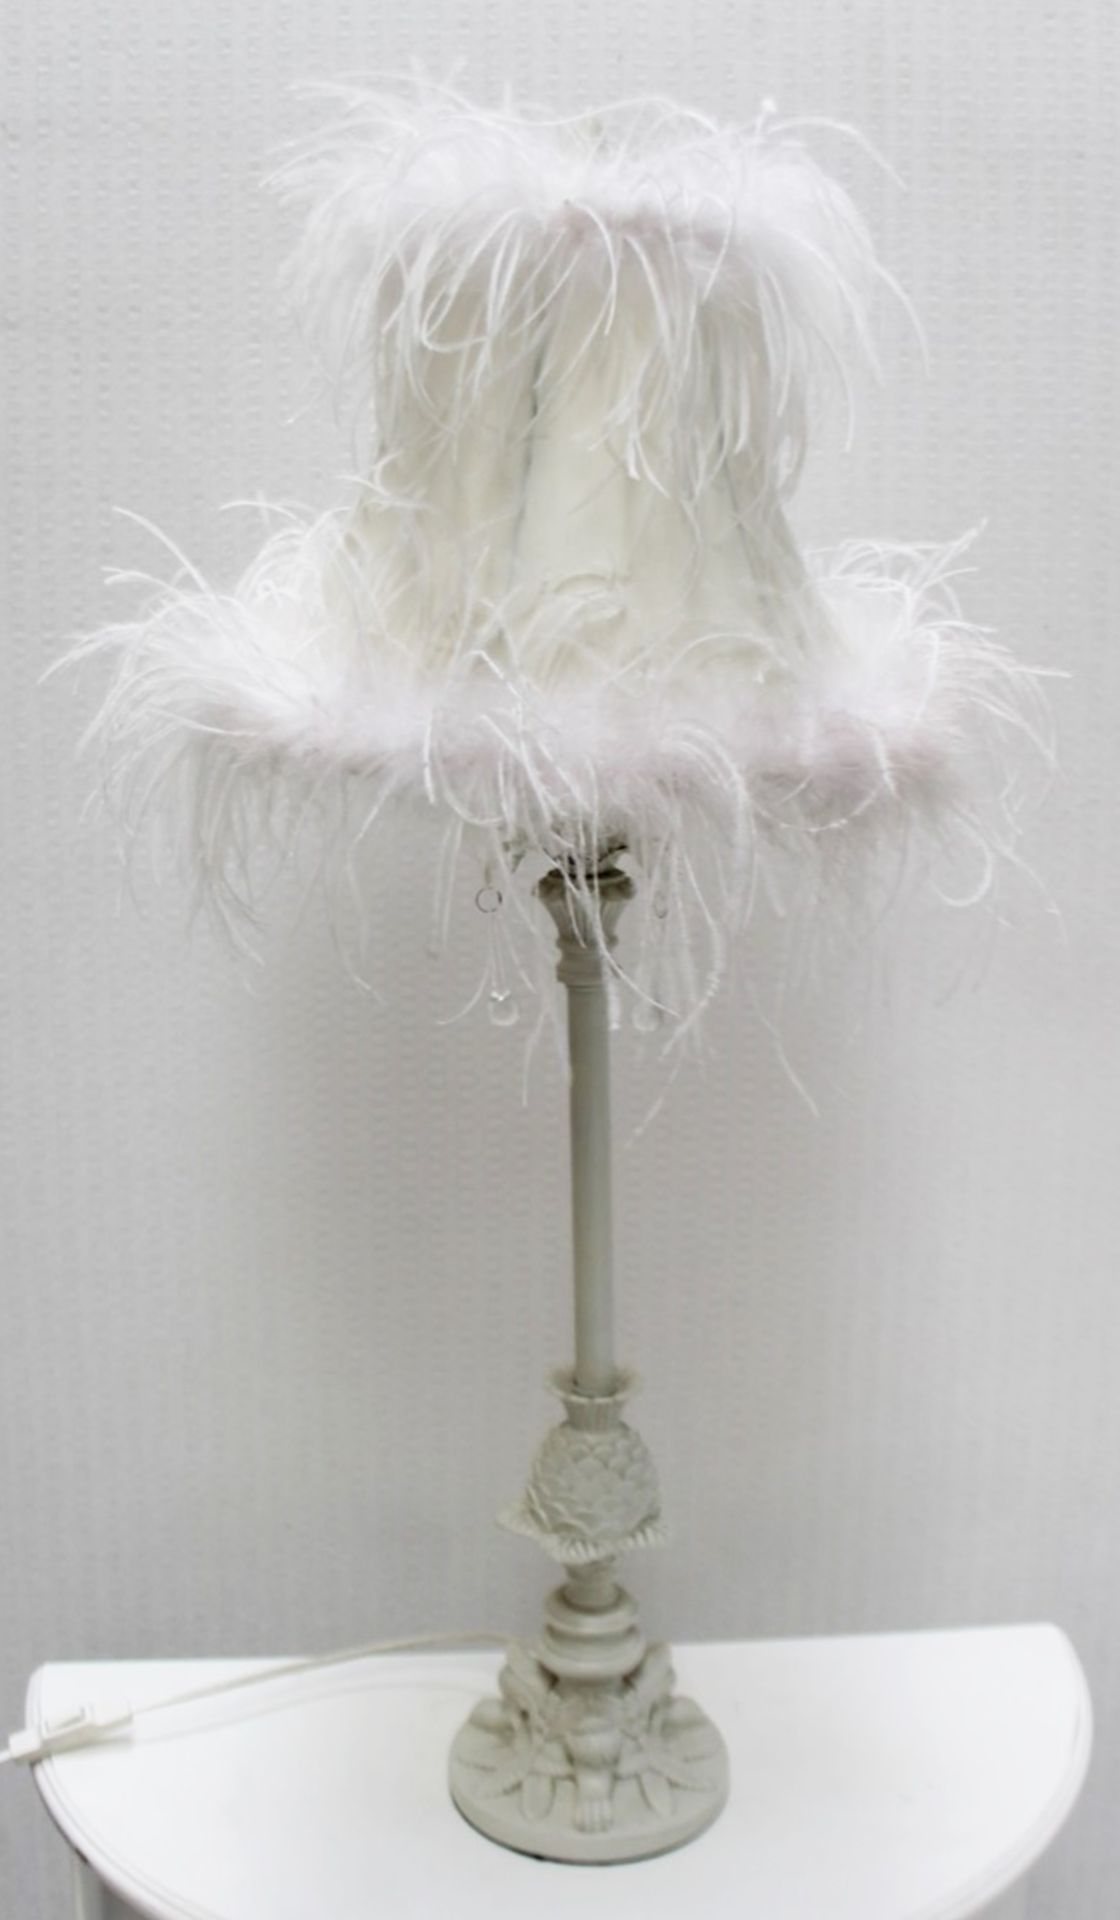 1 x Table Lamp Adored With Feathers And Glass Droplet Decoration - Recently Removed From A